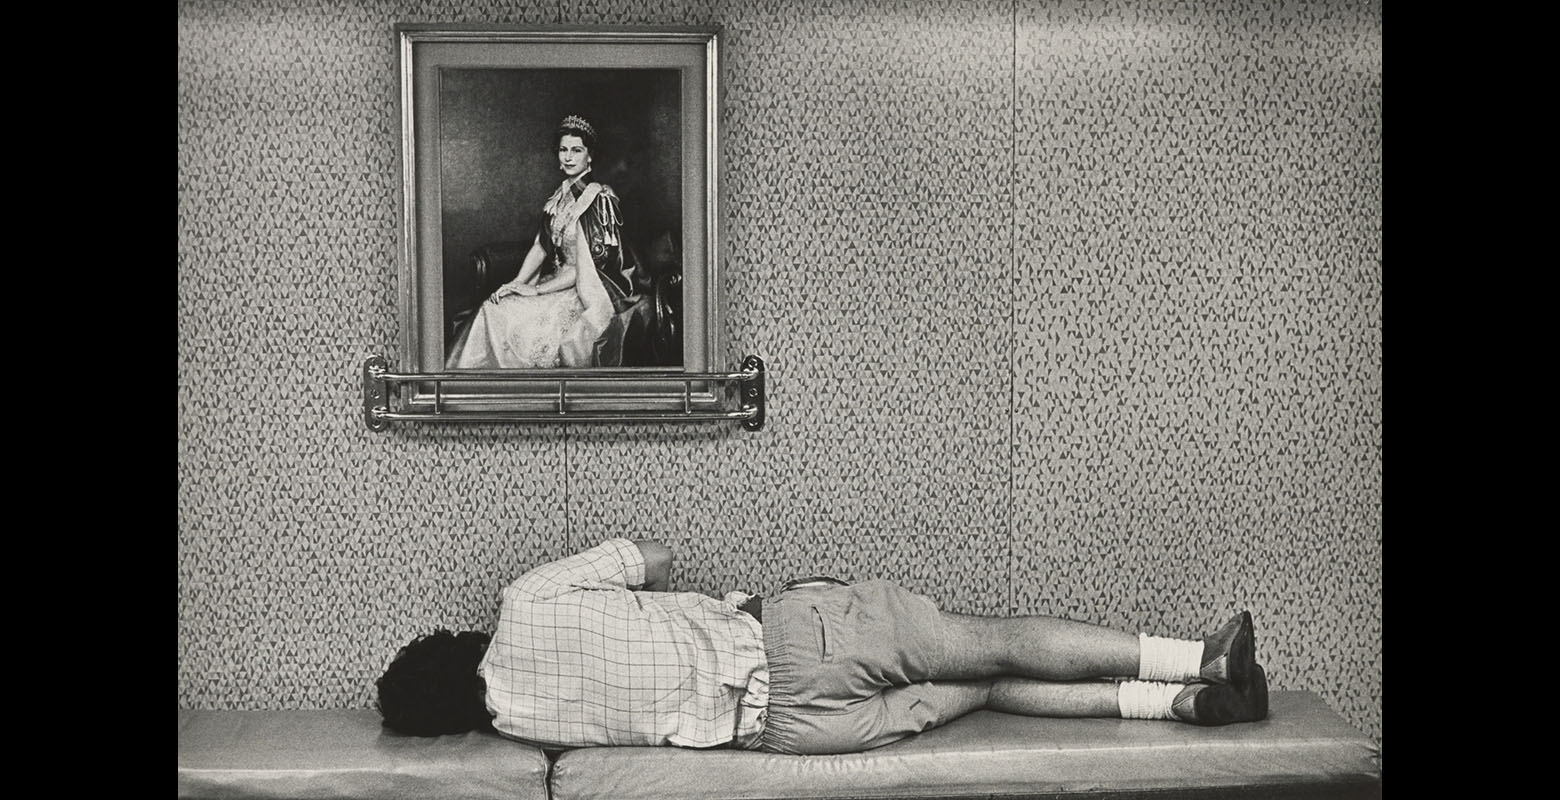 A man lies on a bench, his back to the camera. There is a portrait of Queen Elizabeth the second on the wall above him